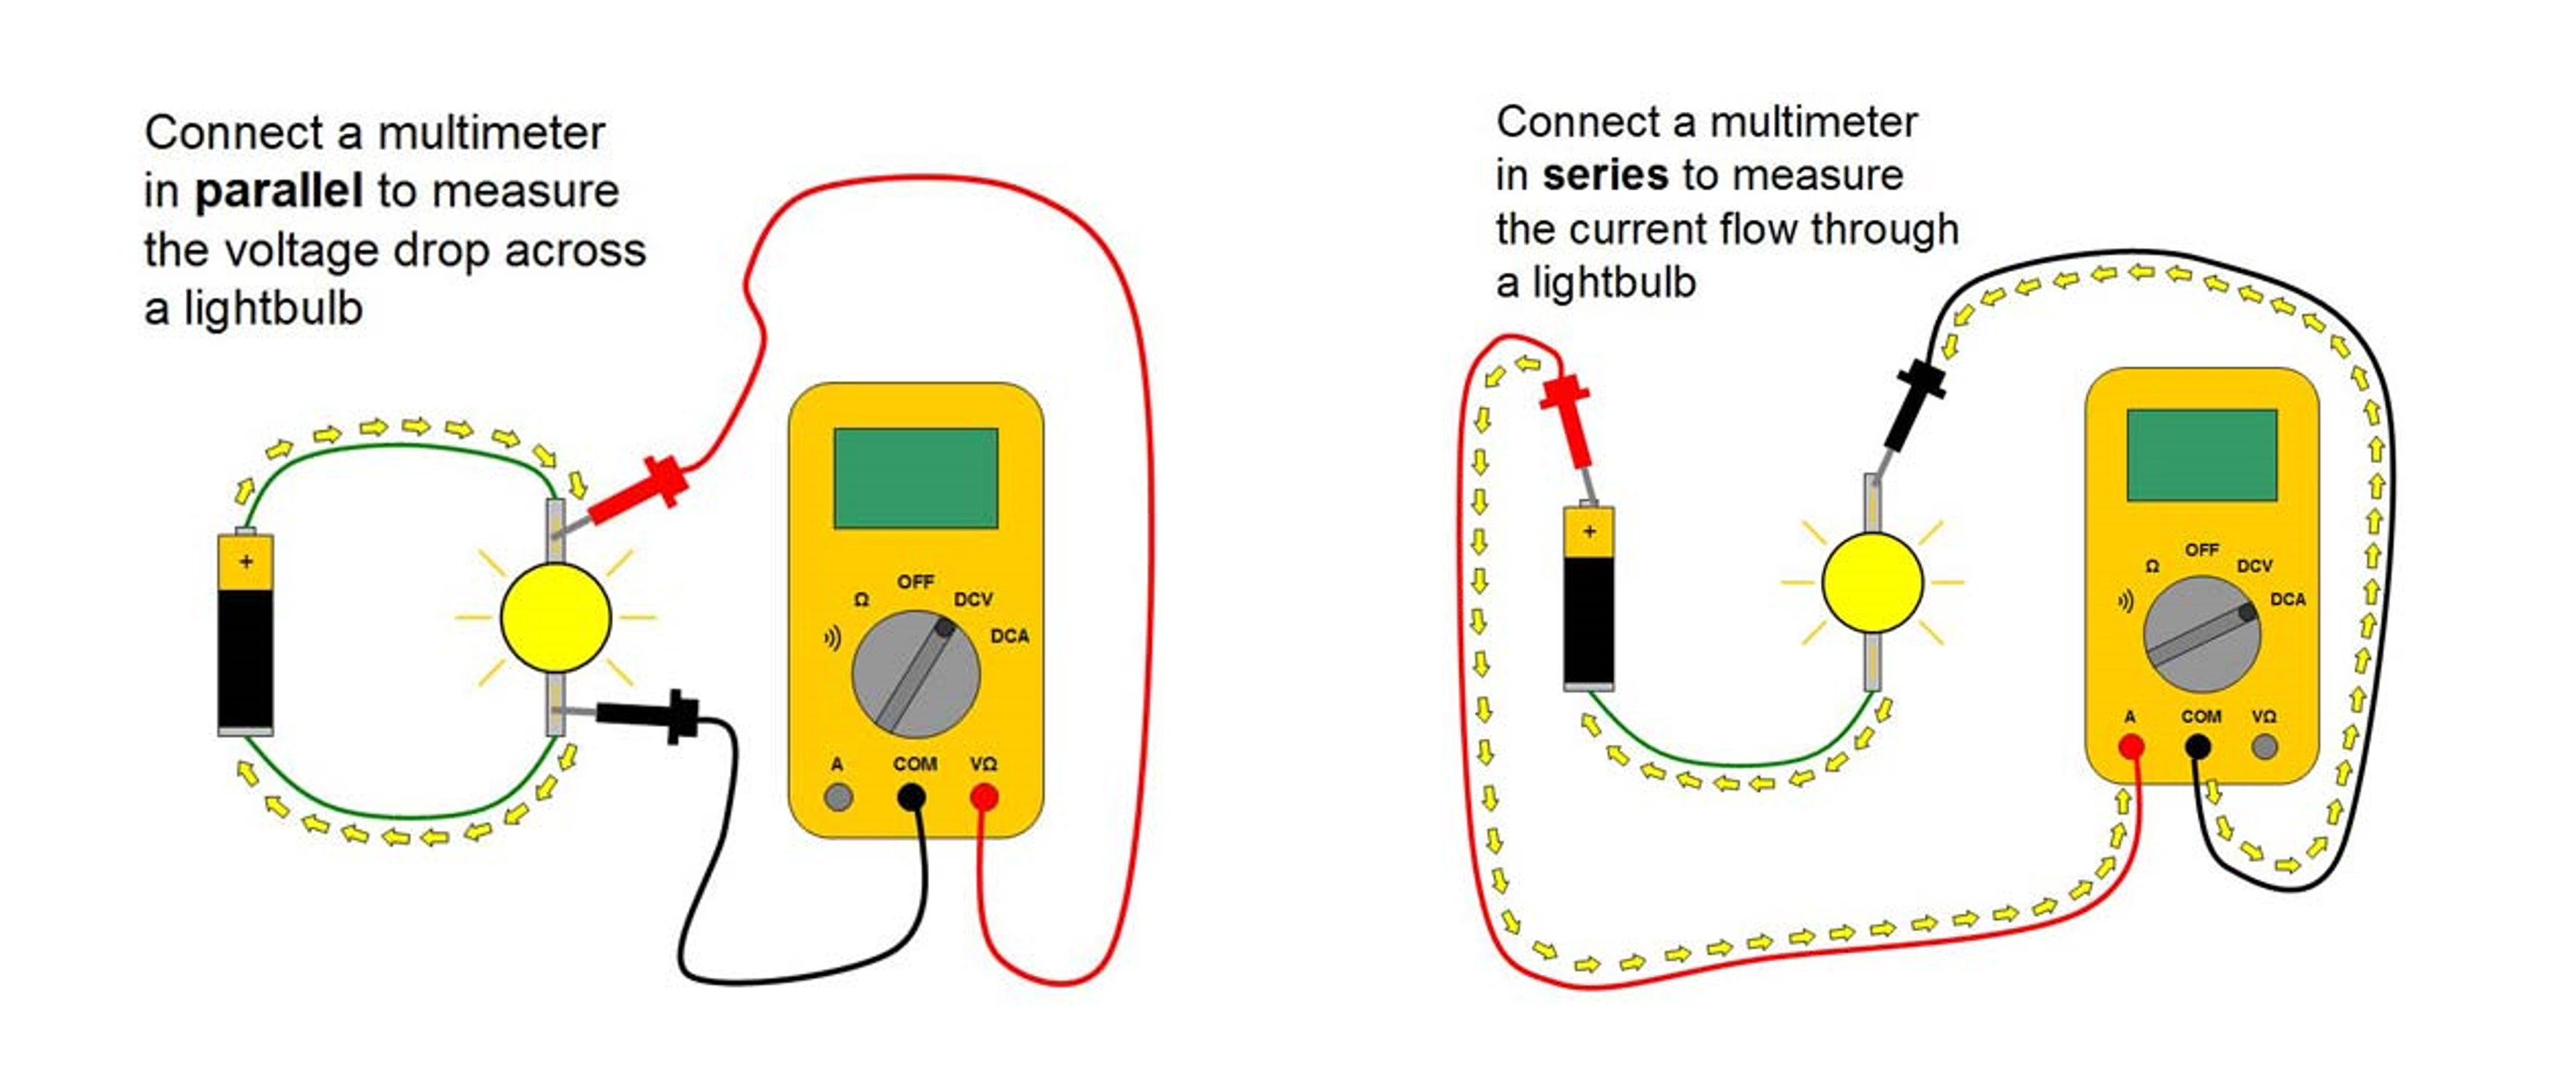 Shows two pictures: image on left shows how to measure voltage in parallel using a multimeter and figure on right shows how to measure current in series using a multimeter